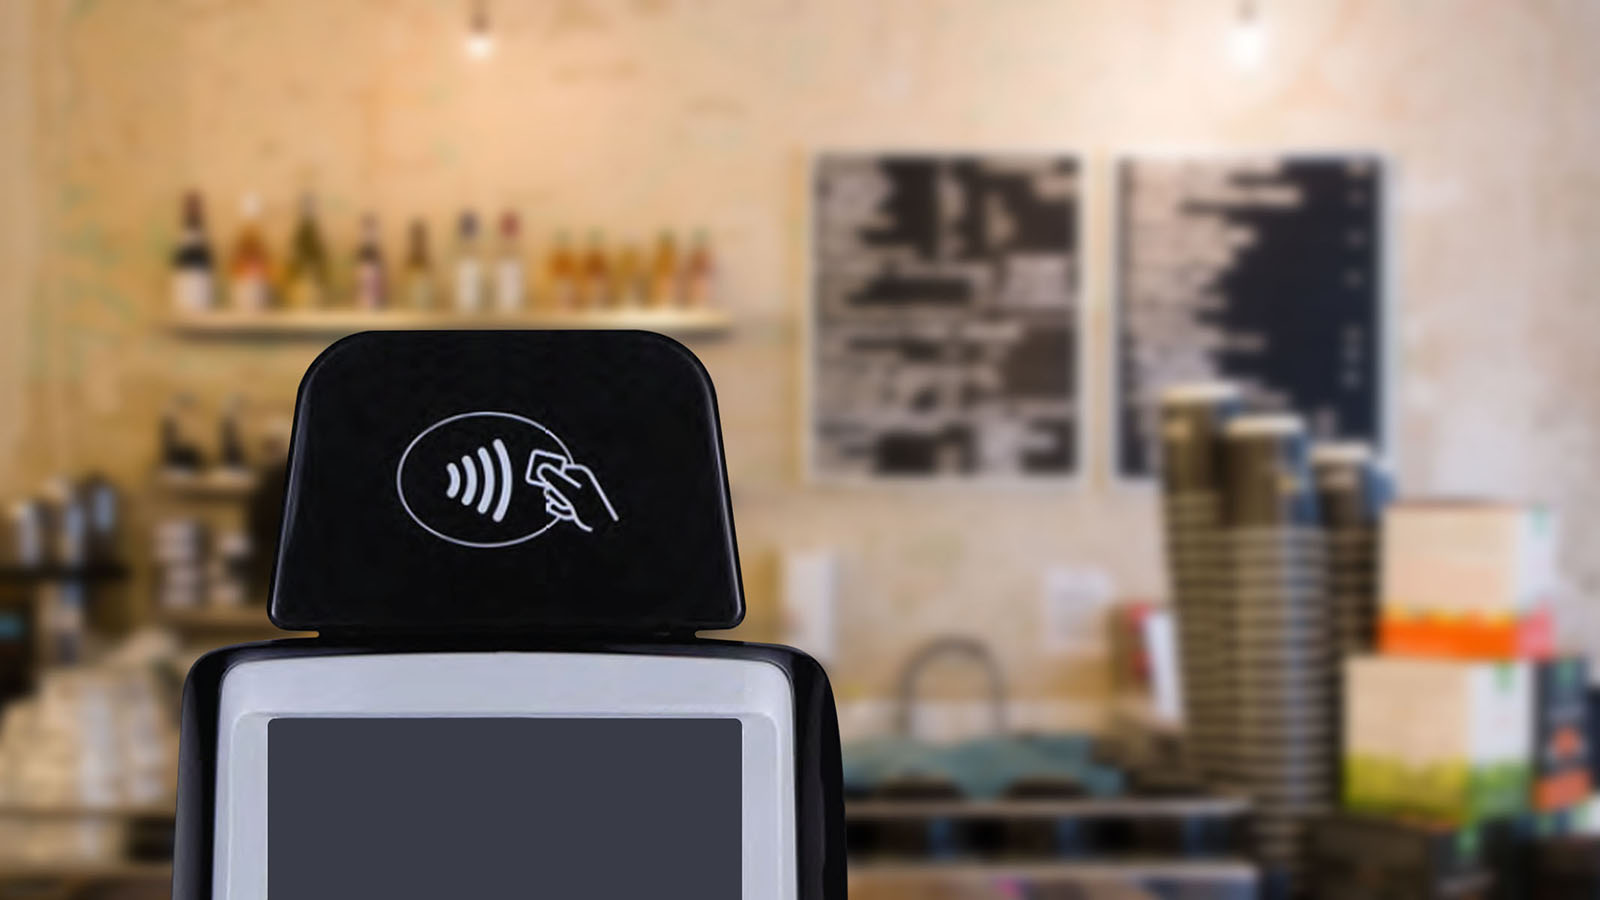 NFC terminal displaying contactless logo in a coffee shop.